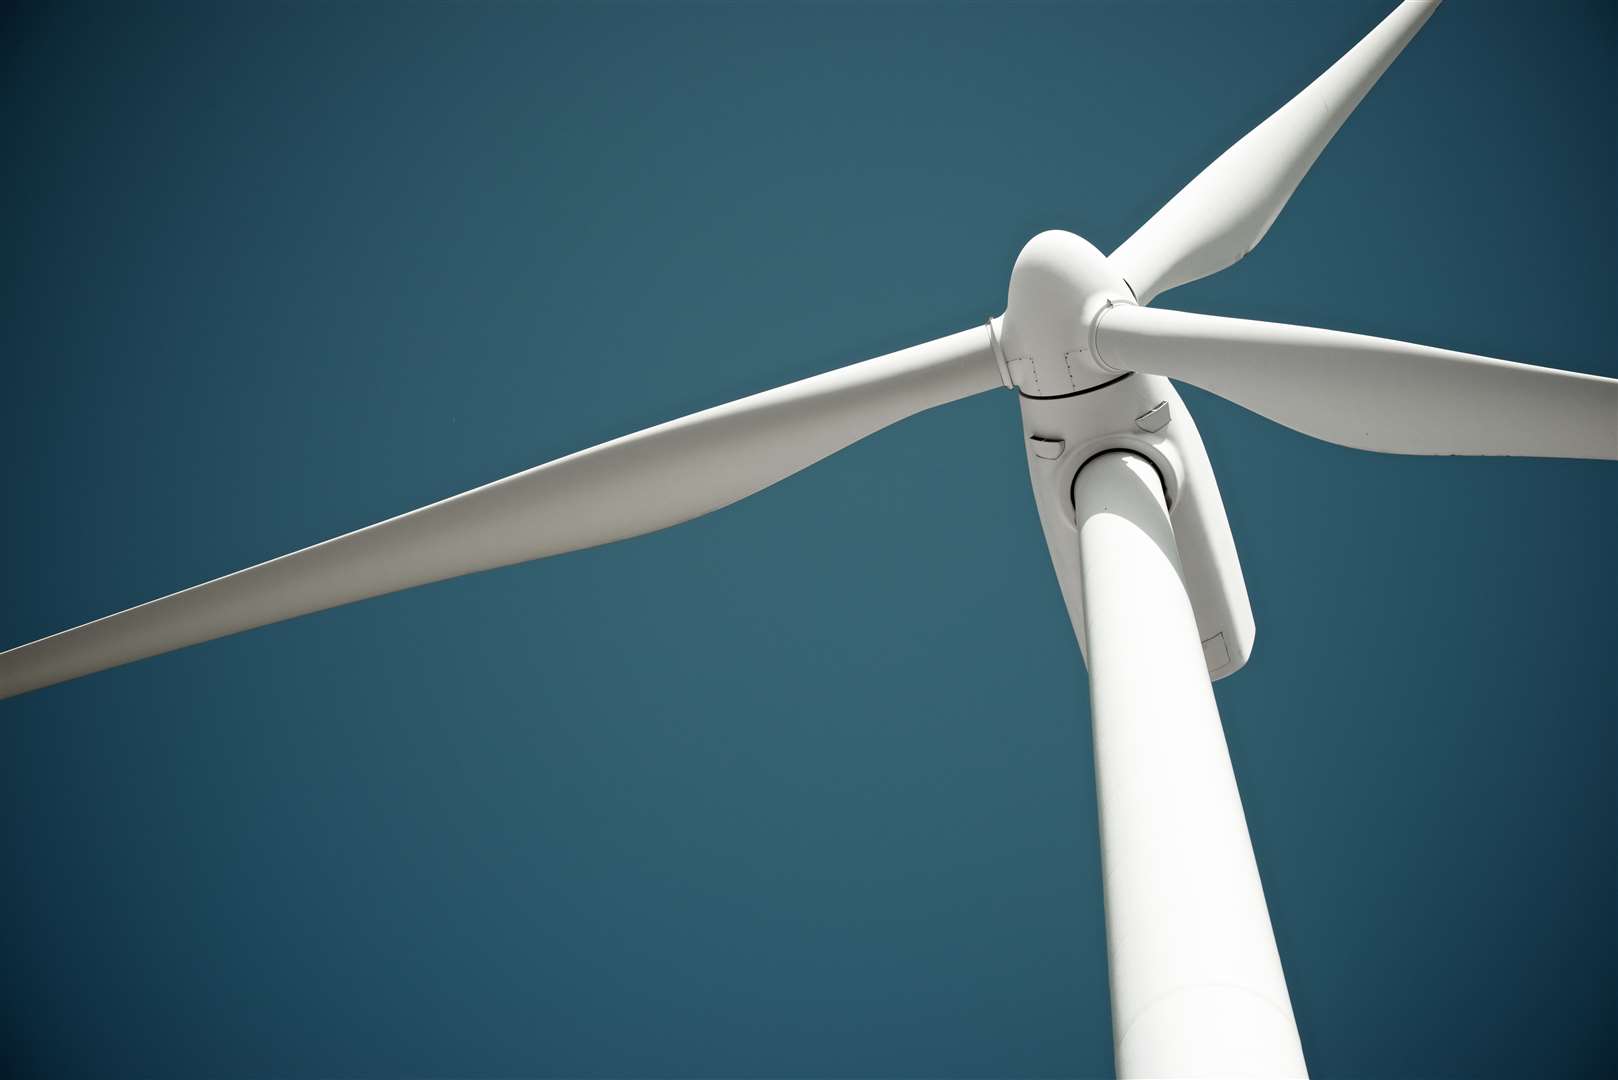 Energiekontor UK was granted planning consent last October for the 10-turbine Lairg II Wind Farm, to be sited four kilometres to the south east of Lairg.